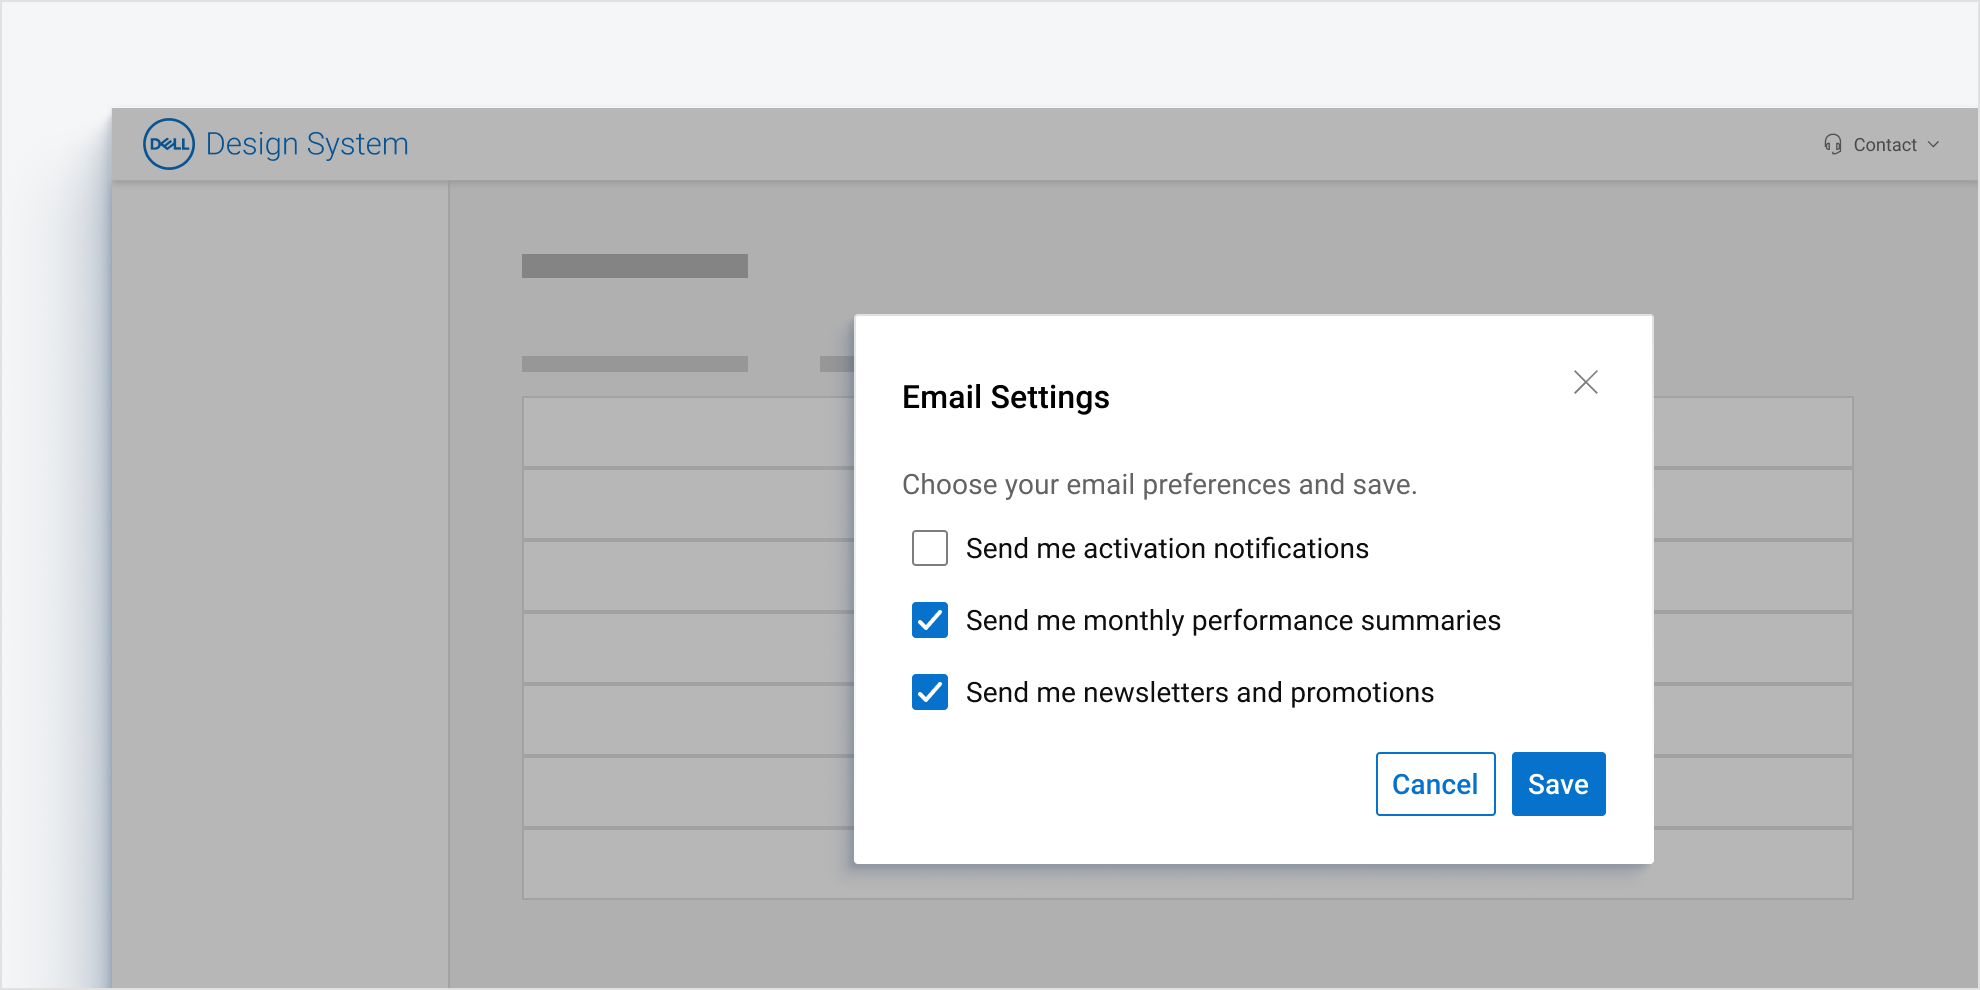 Checkbox group for email settings.